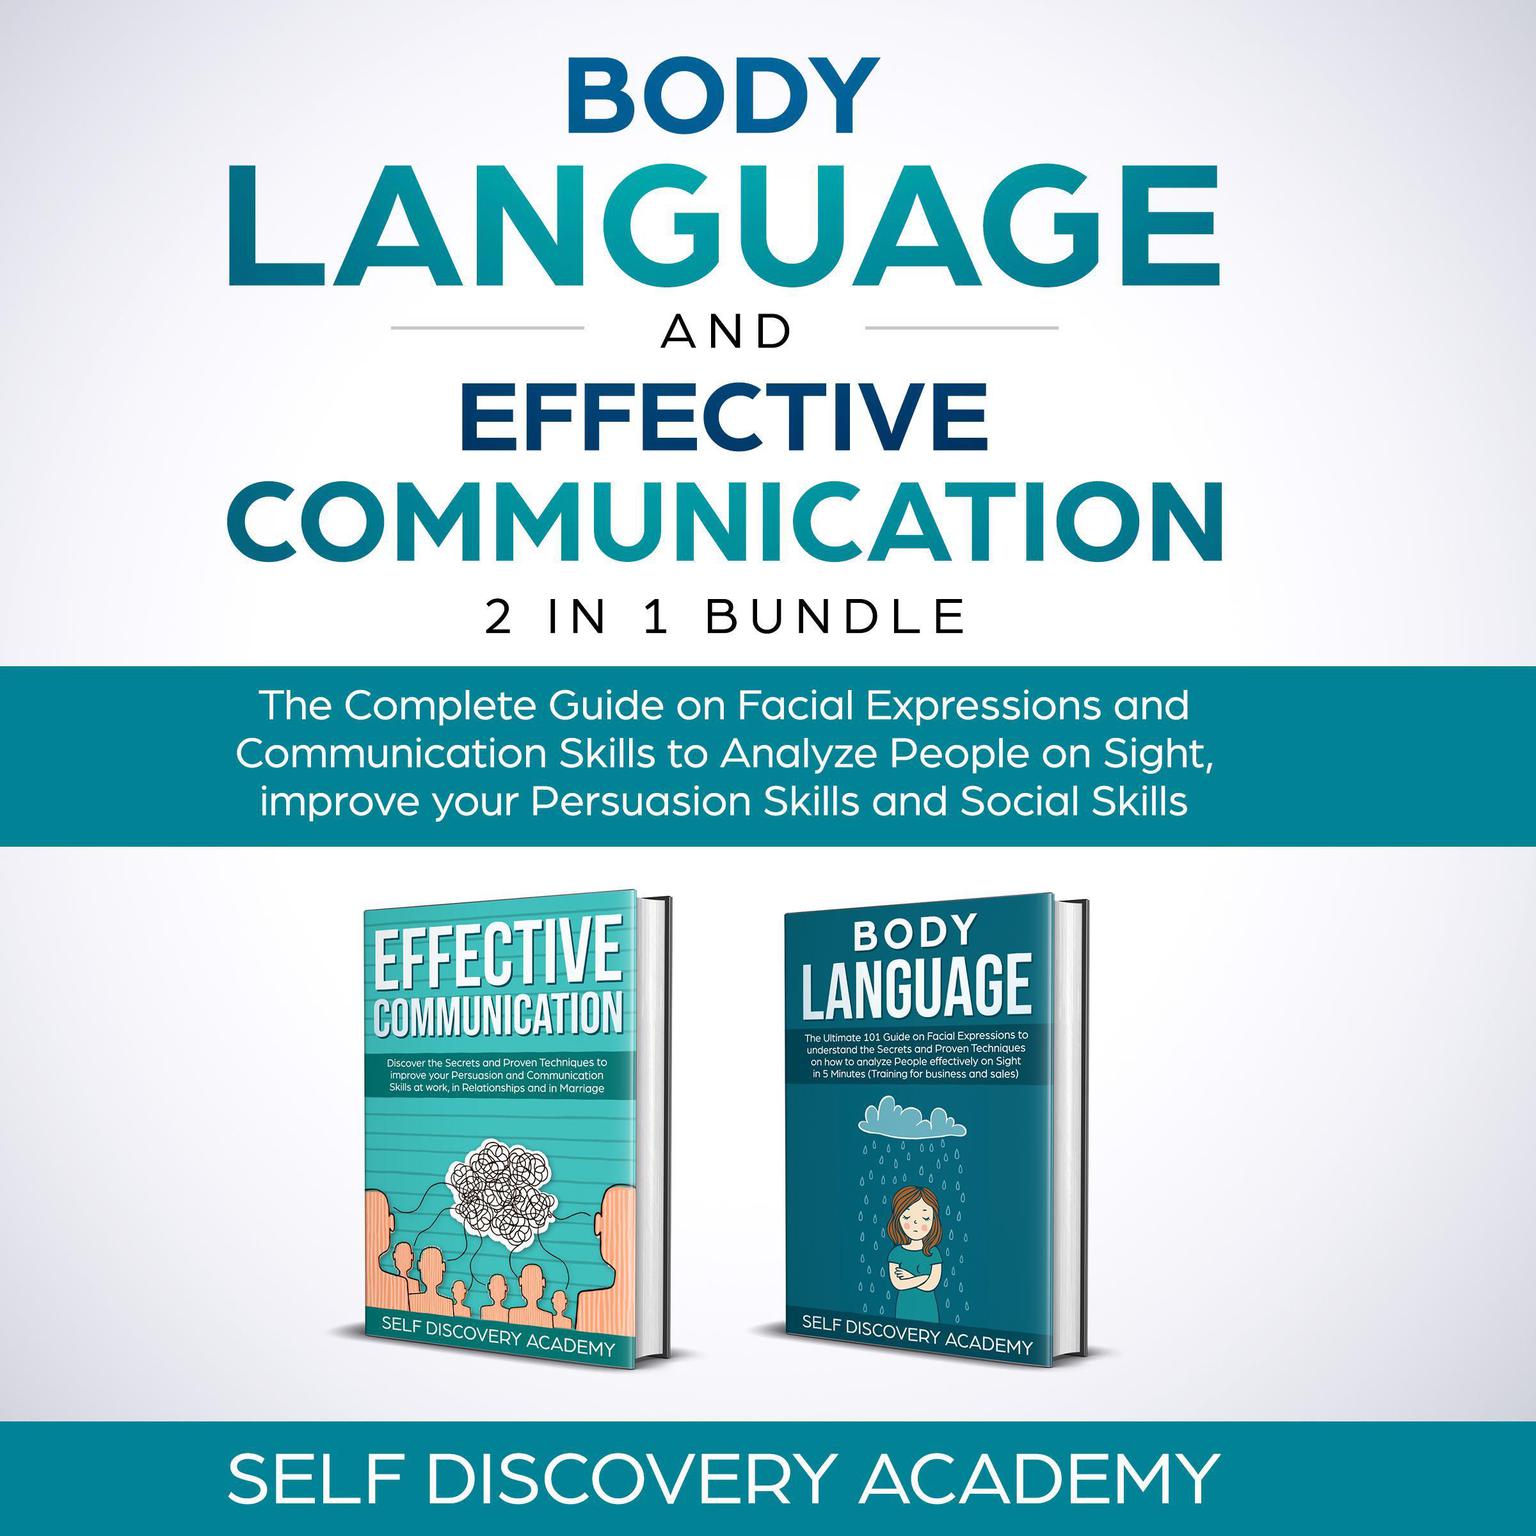 Body Language and Effective Communication 2 in 1 Bundle: The Complete Guide on Facial Expressions and Communication Skills to Analyze People on Sight, Improve Your Persuasion Skills, and and Social Skills Audiobook, by Self Discovery Academy